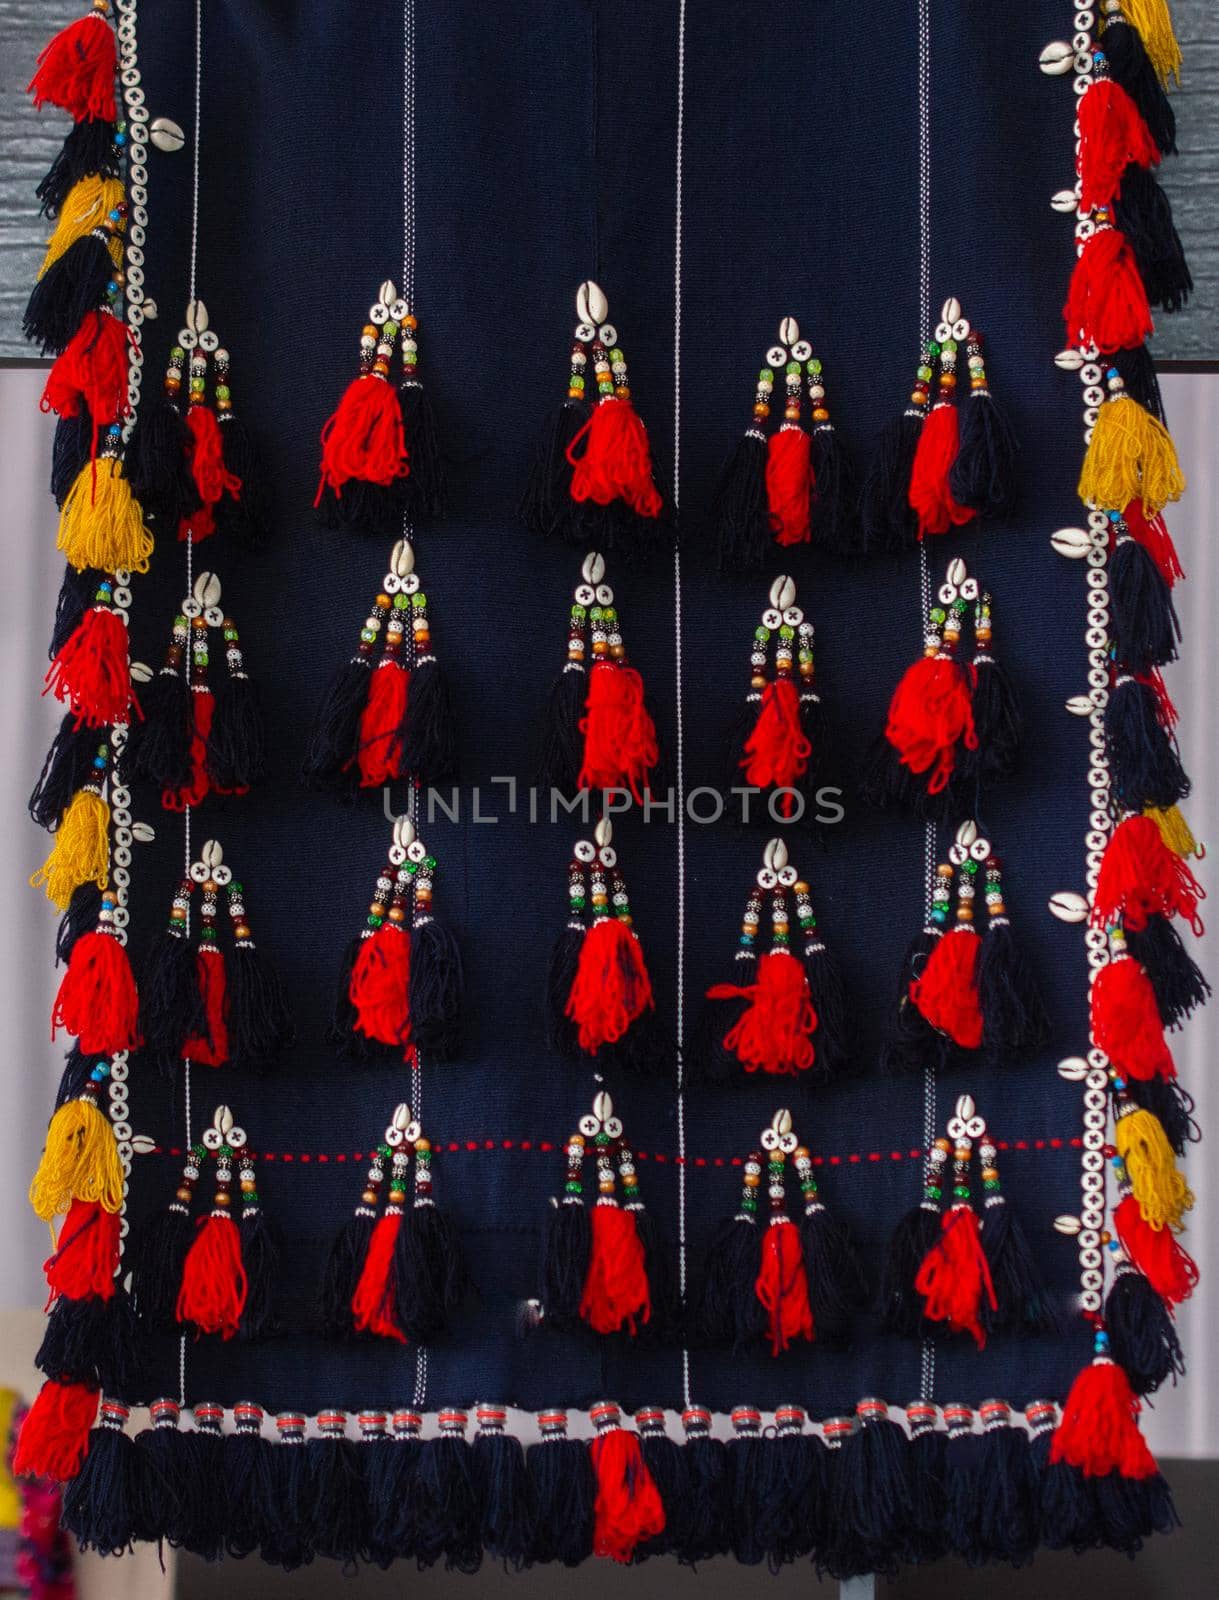 Selection of Ottoman Turkish traditional tassels in various colors